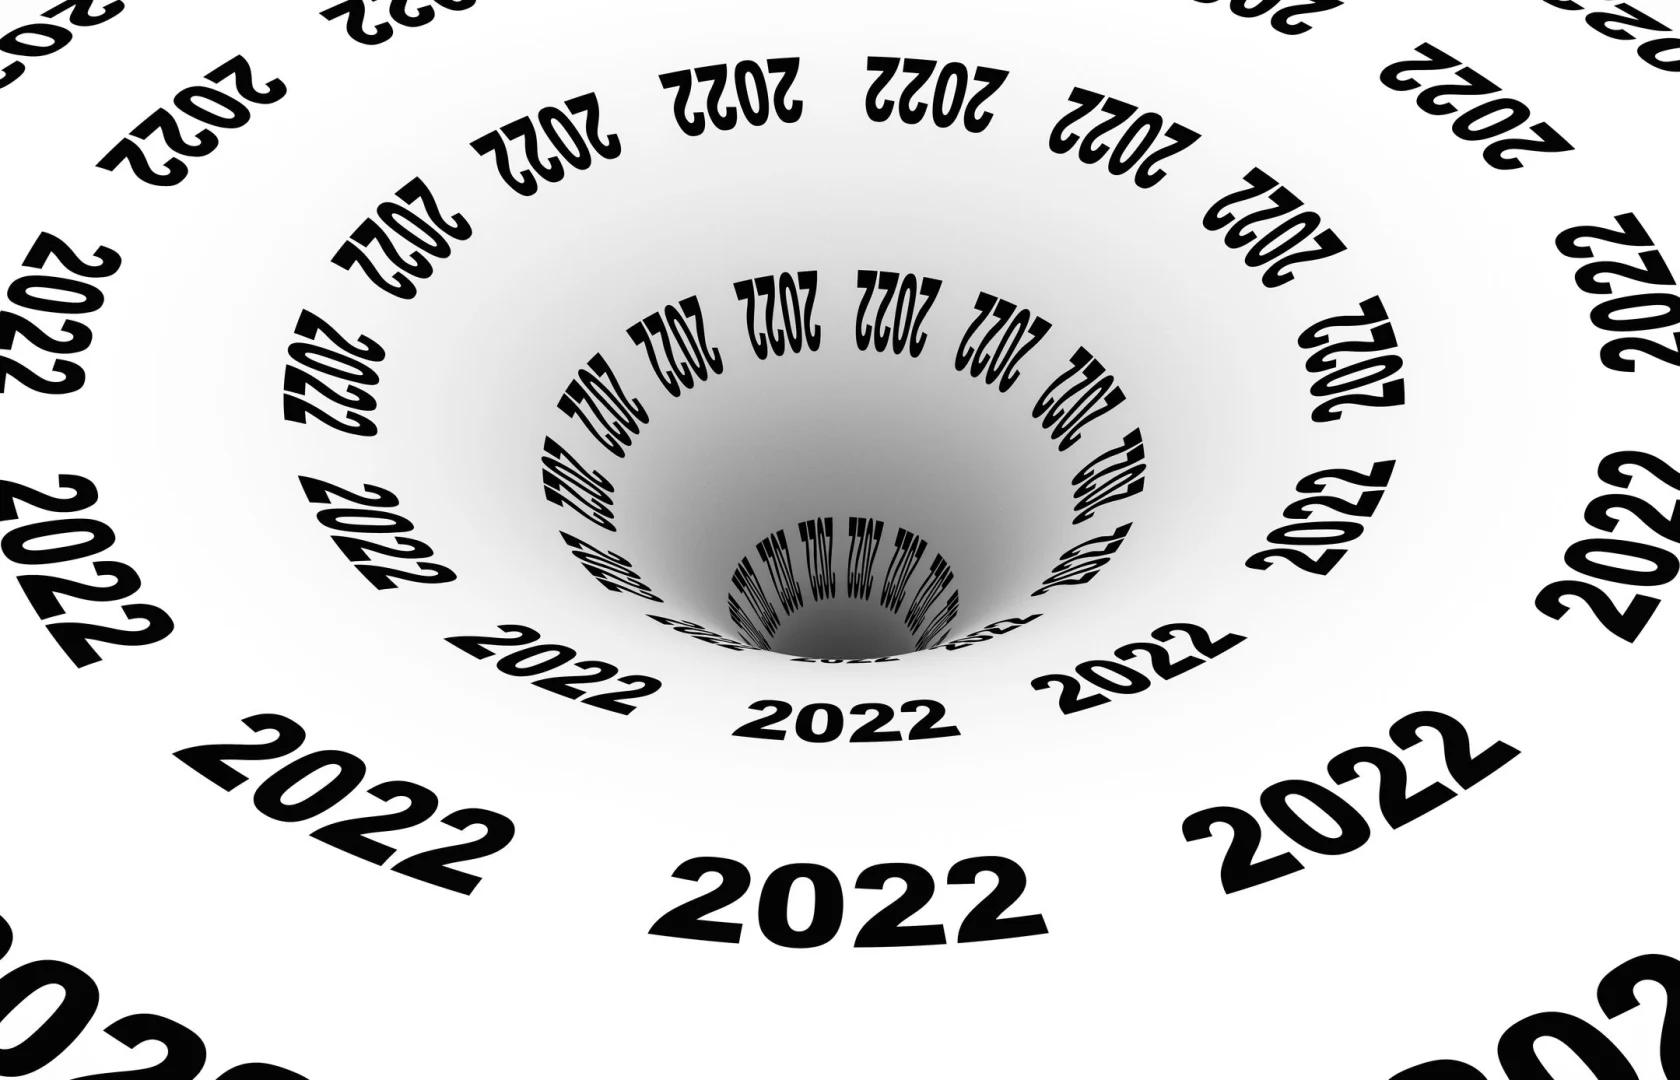 2022: The Year of Confirmed Conspiracy Theories